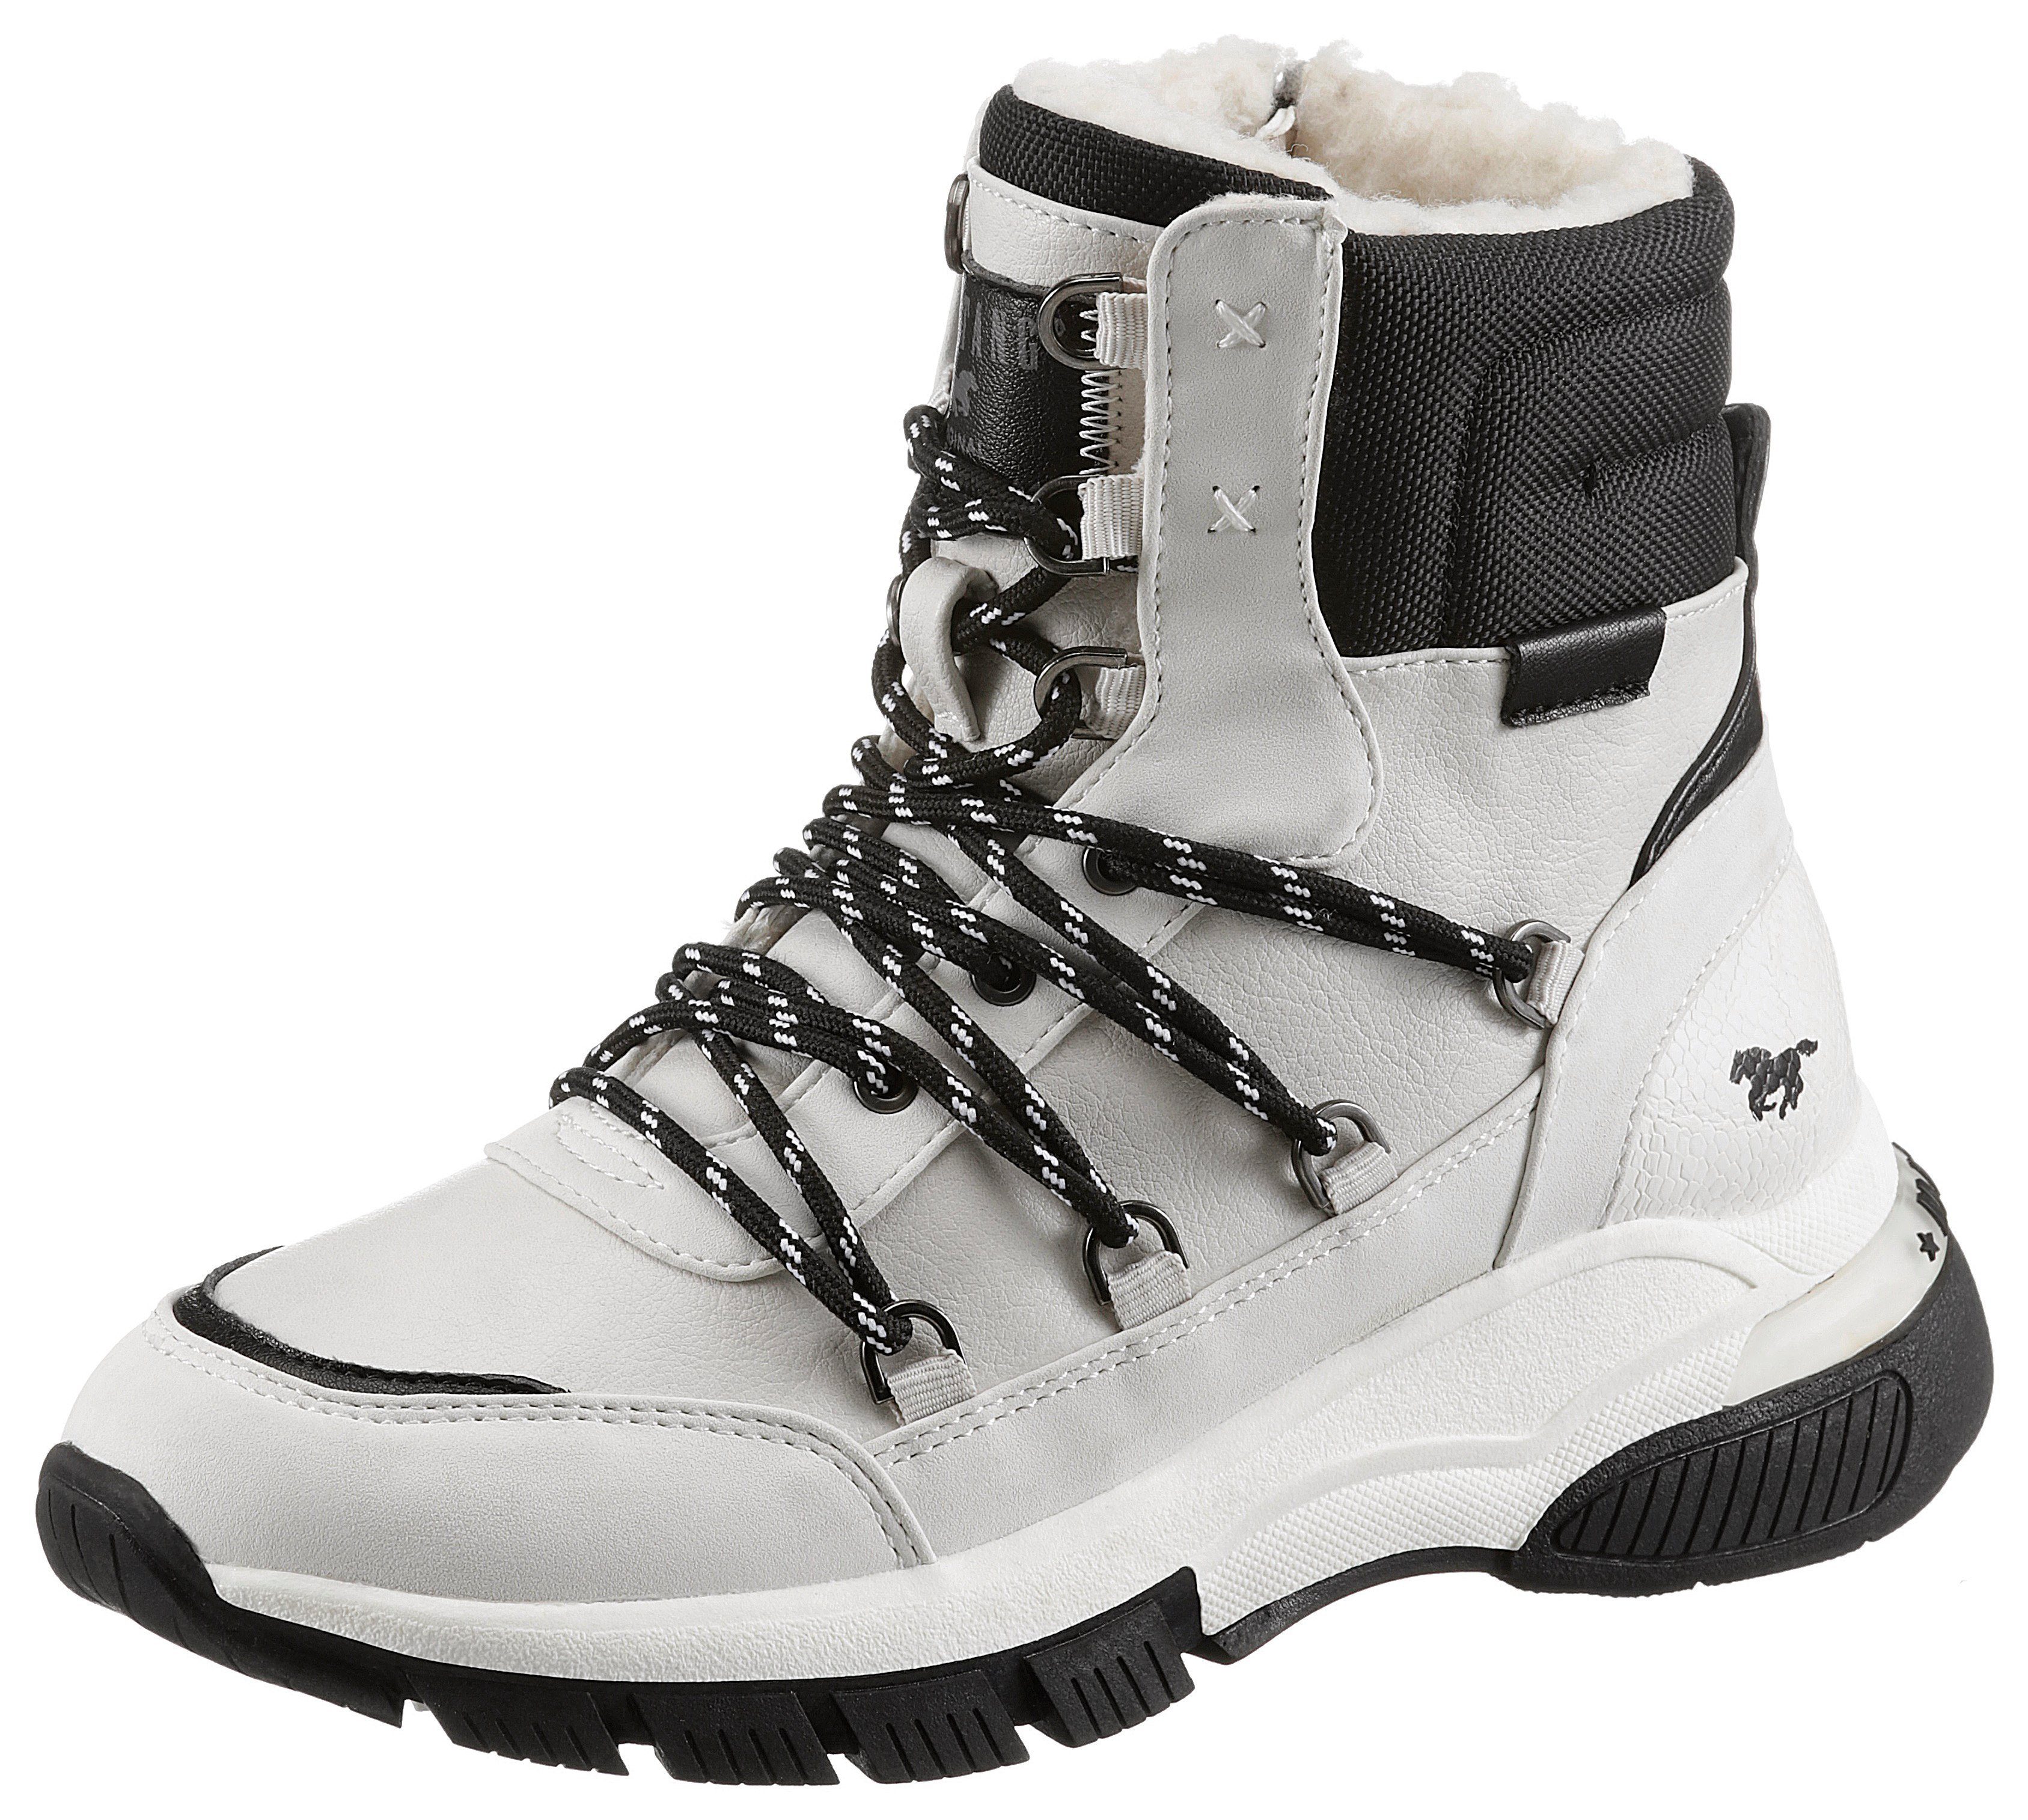 Mustang Shoes Winterboots zweifarbiger Laufsohle mit offwhite